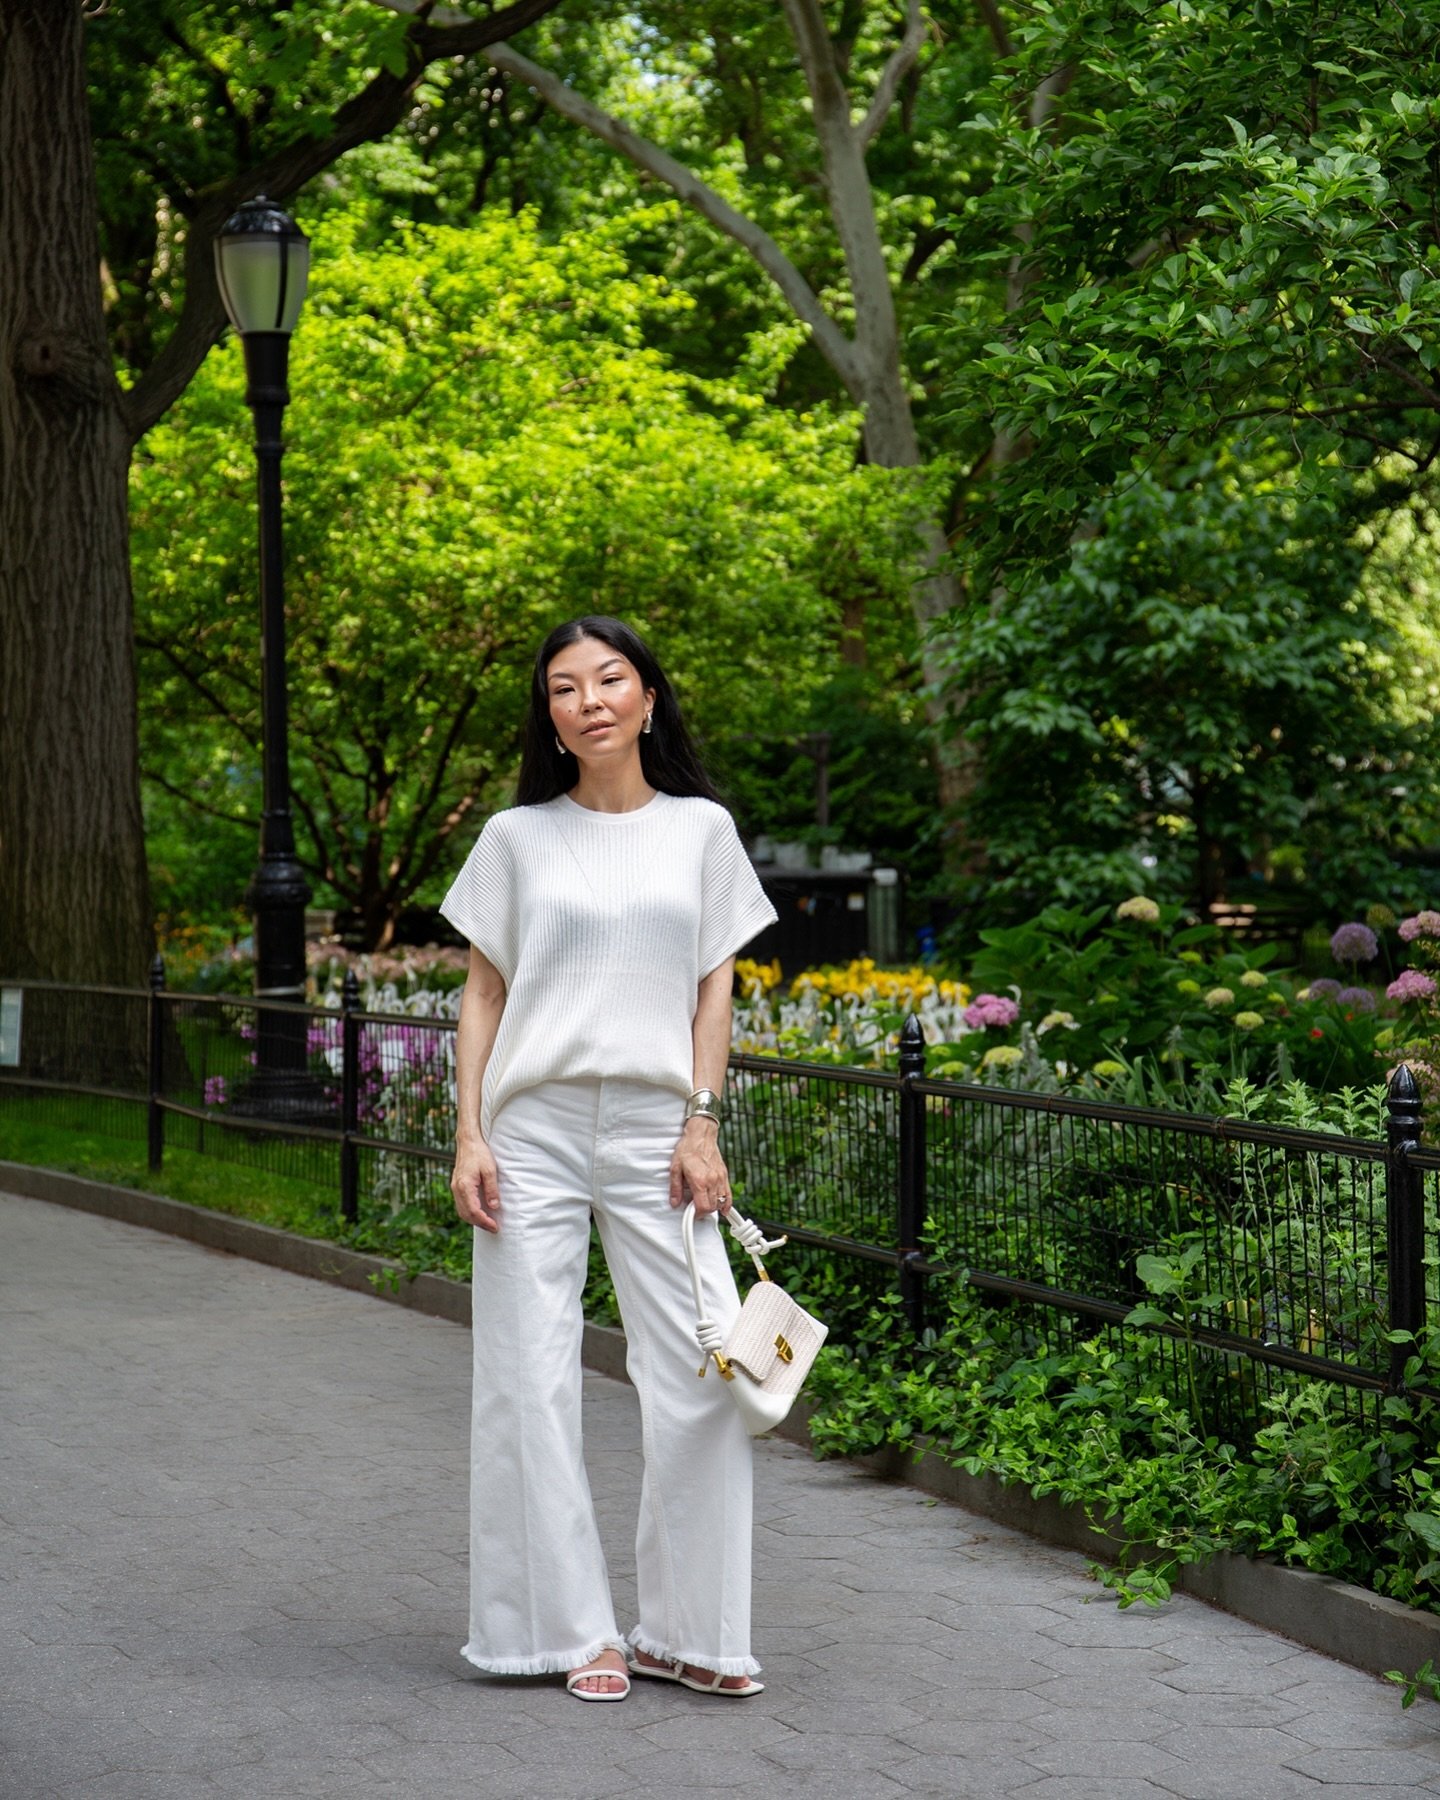 Summer whites 🤍 @everlane
More details on this #Monochromatic look on my @shop.Itk page and here:  https://liketk.it/4HgCi #Everlane #AllWhiteOutfit #SummerFashion  #OutfitInspo